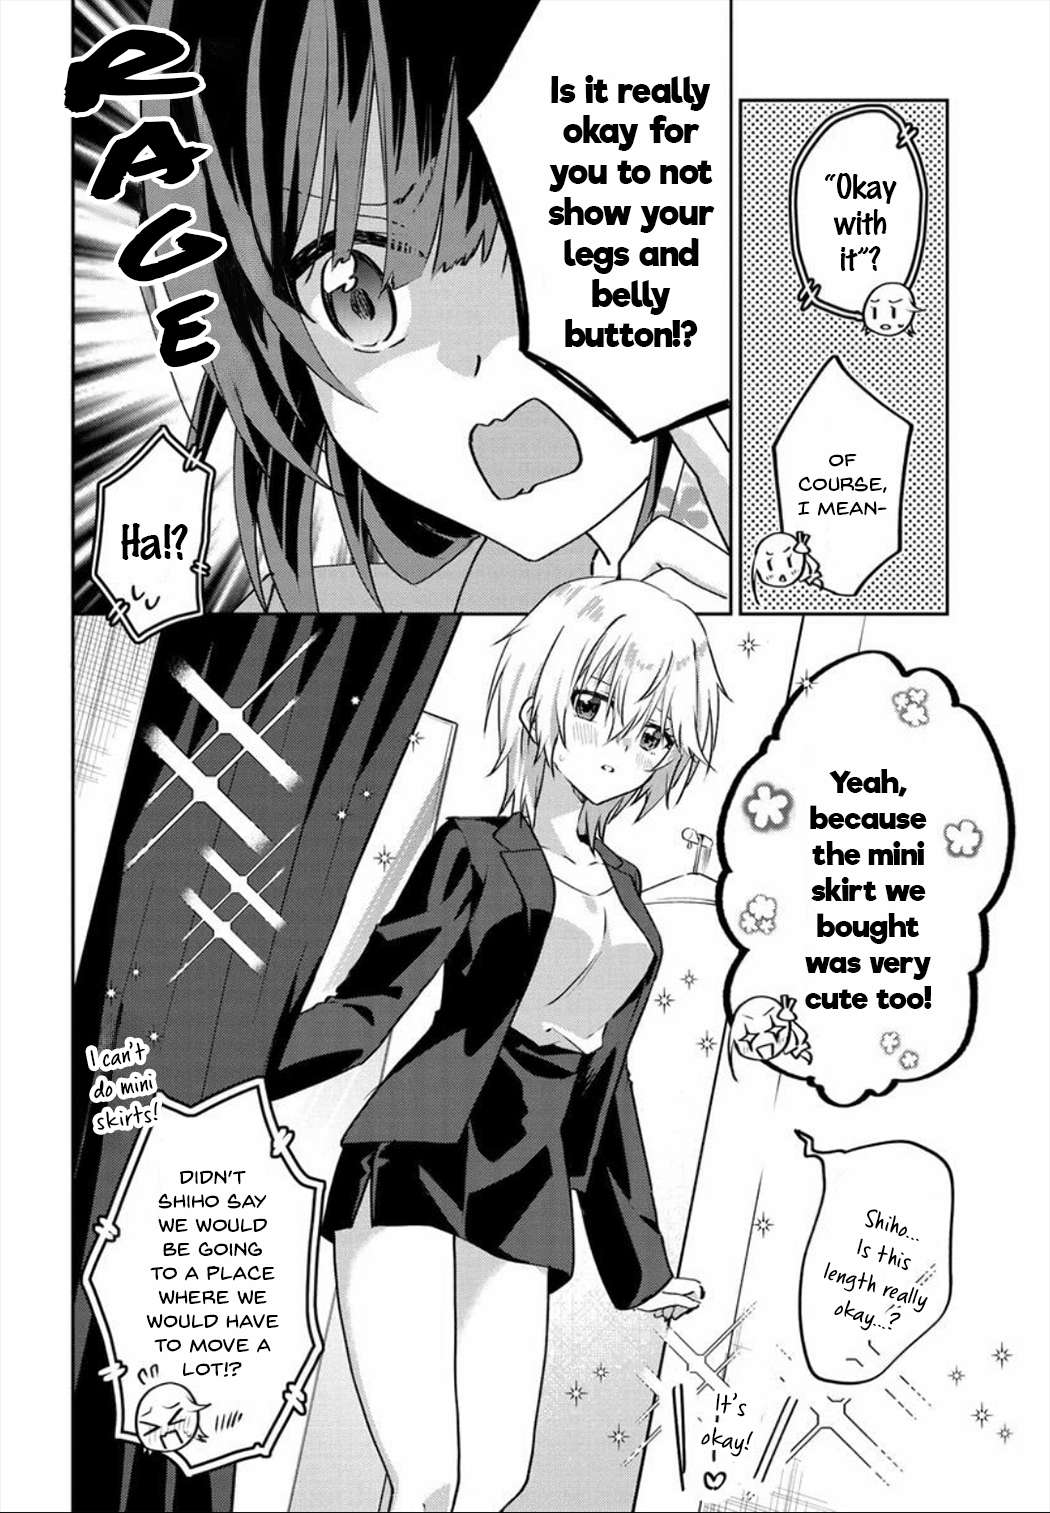 Since I’Ve Entered The World Of Romantic Comedy Manga, I’Ll Do My Best To Make The Losing Heroine Happy - chapter 6.6 - #2